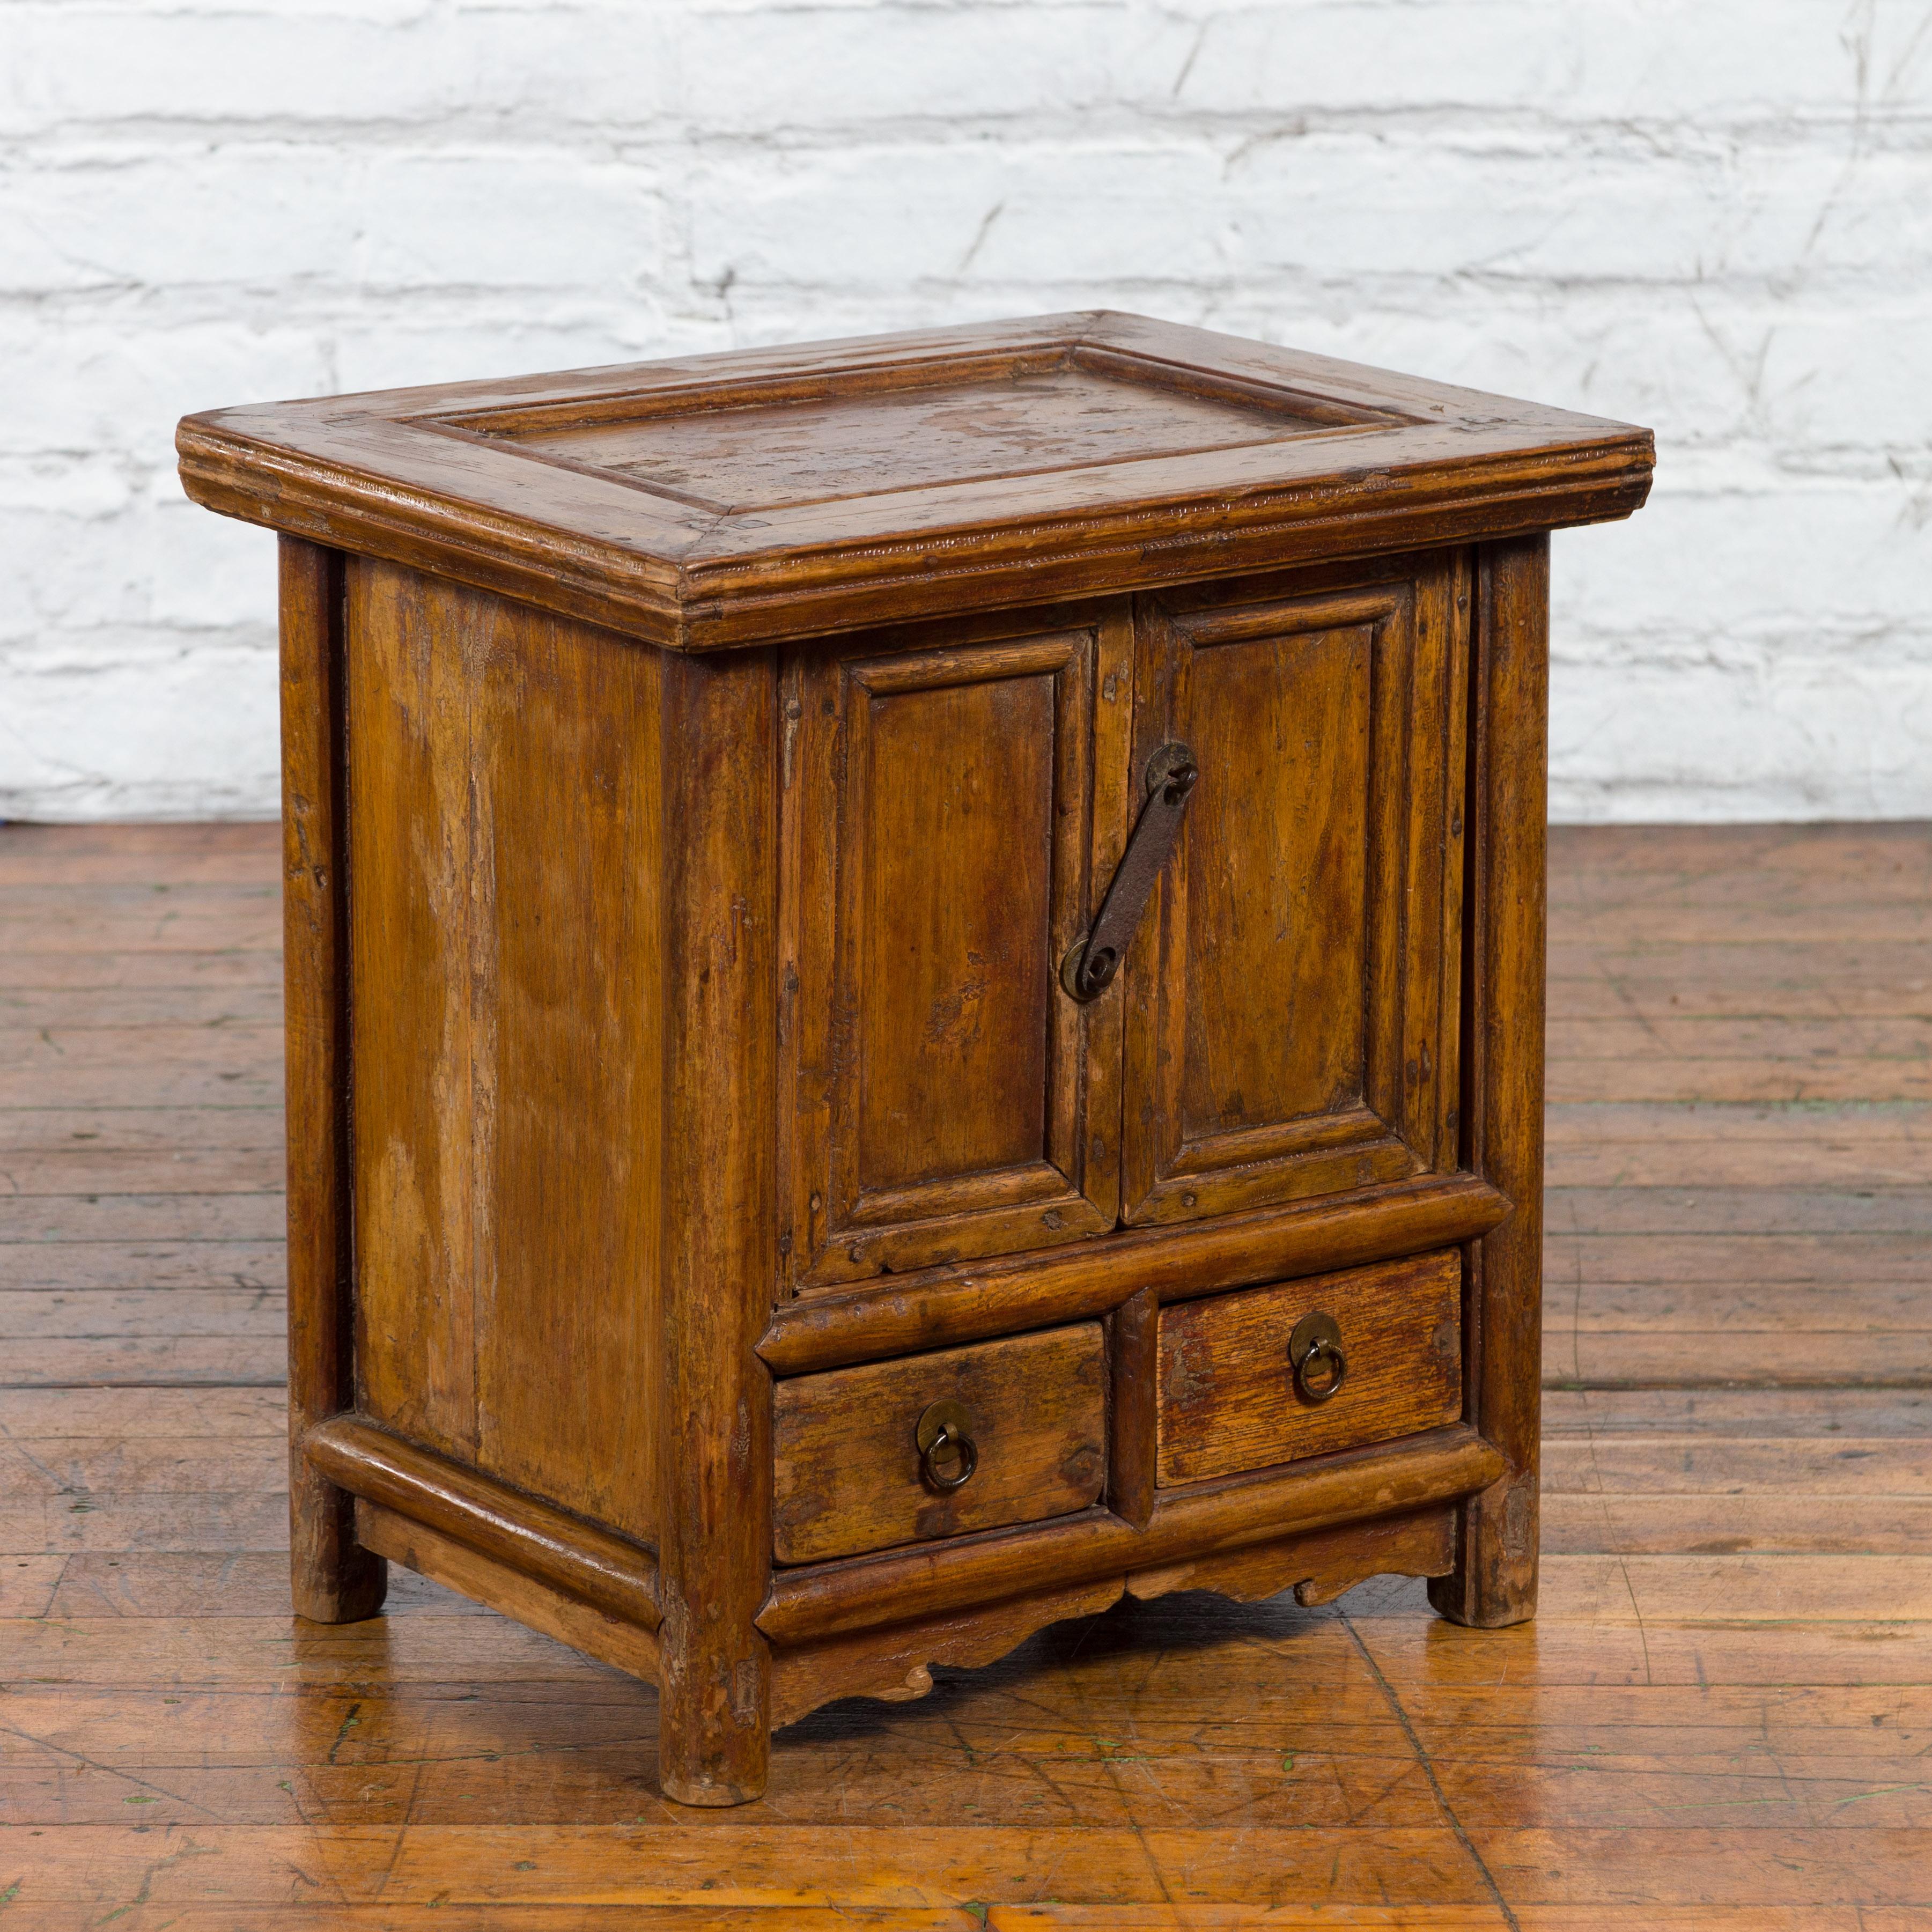 A Chinese antique elm wood bedside cabinet from the early 20th century, with double doors, two drawers, iron hardware and weathered patina. Created in China during the early years of the 20th century, this elm wood bedside cabinet features a